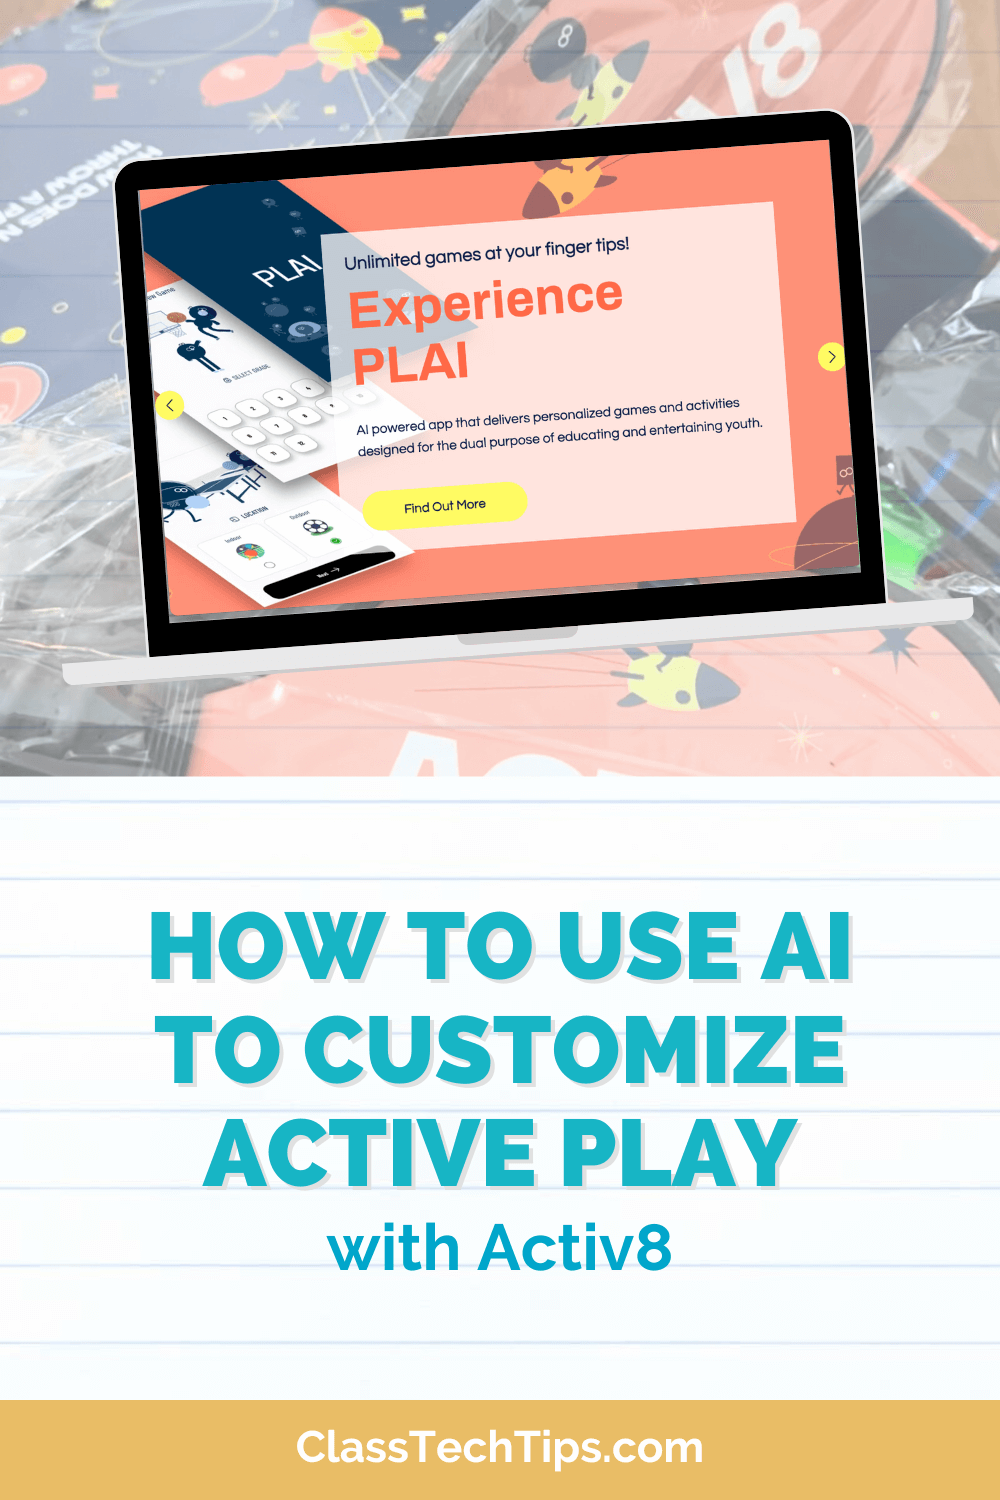 A colorful promotional image featuring a digital tablet displaying the words "Experience PLAI" with icons of a smartphone and a rocket. The tablet rests on a background with a playful design and scattered toys. A bold headline reads "HOW TO USE AI TO CUSTOMIZE ACTIVE PLAY with Activ8" at the bottom in blue font.